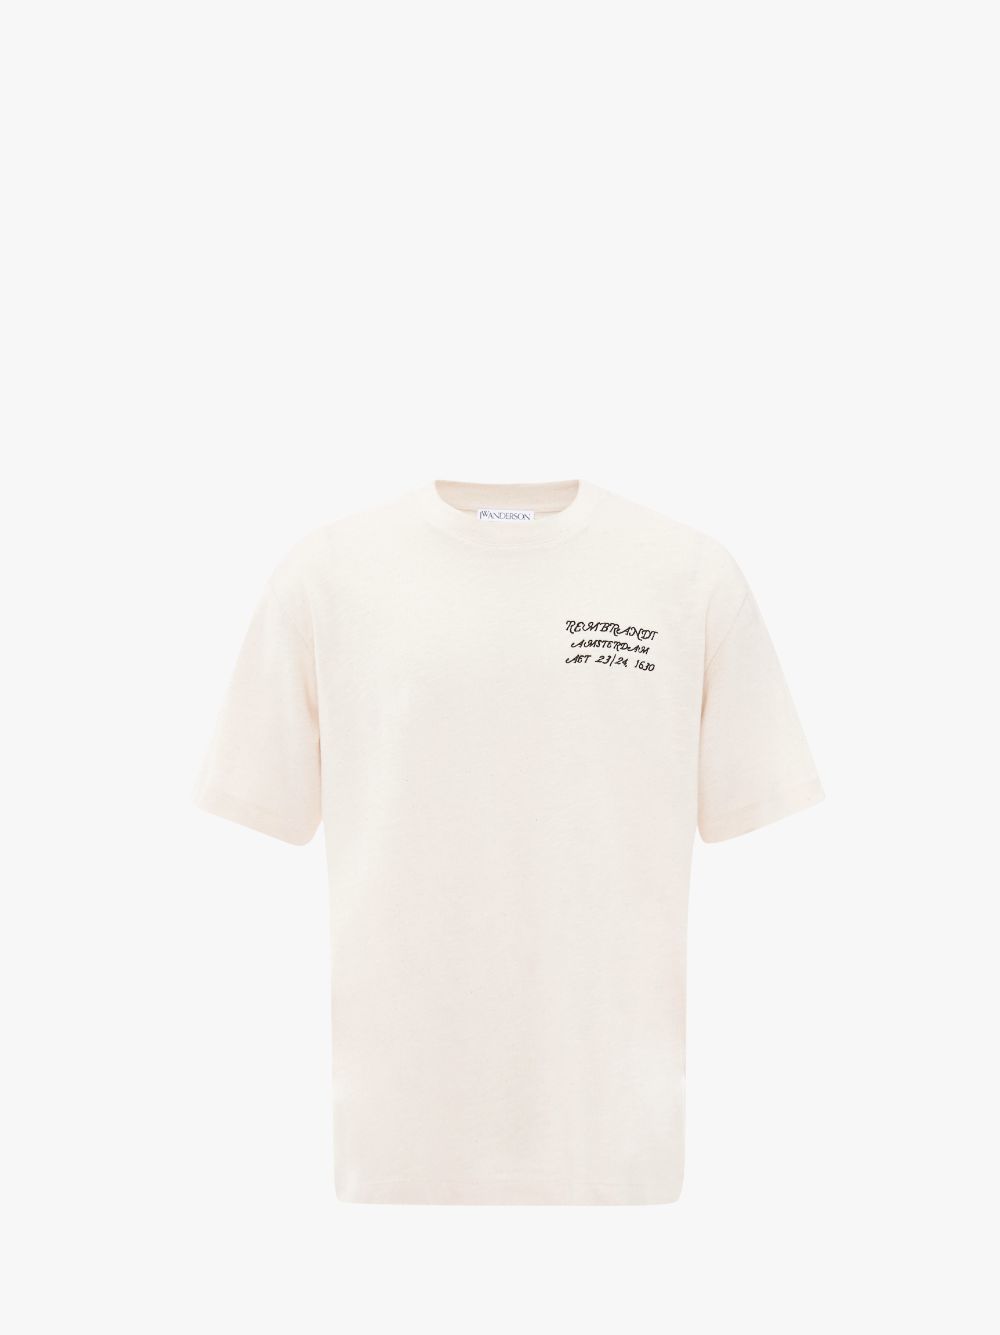 JW Anderson Rembrandt Oversized Tee